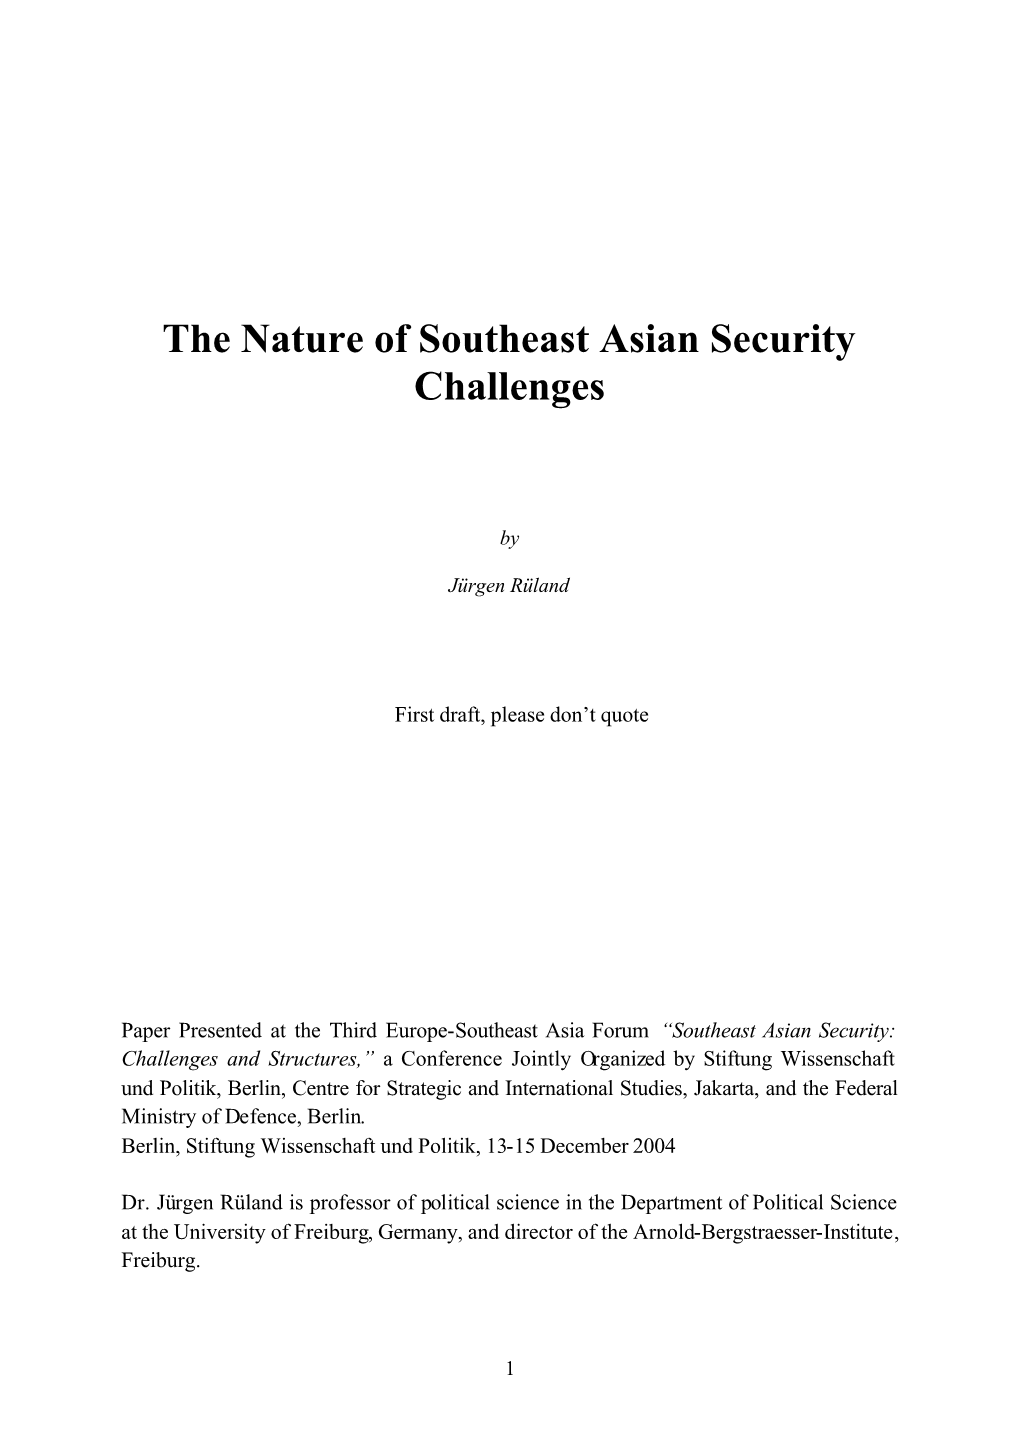 The Nature of Southeast Asian Security Challenges